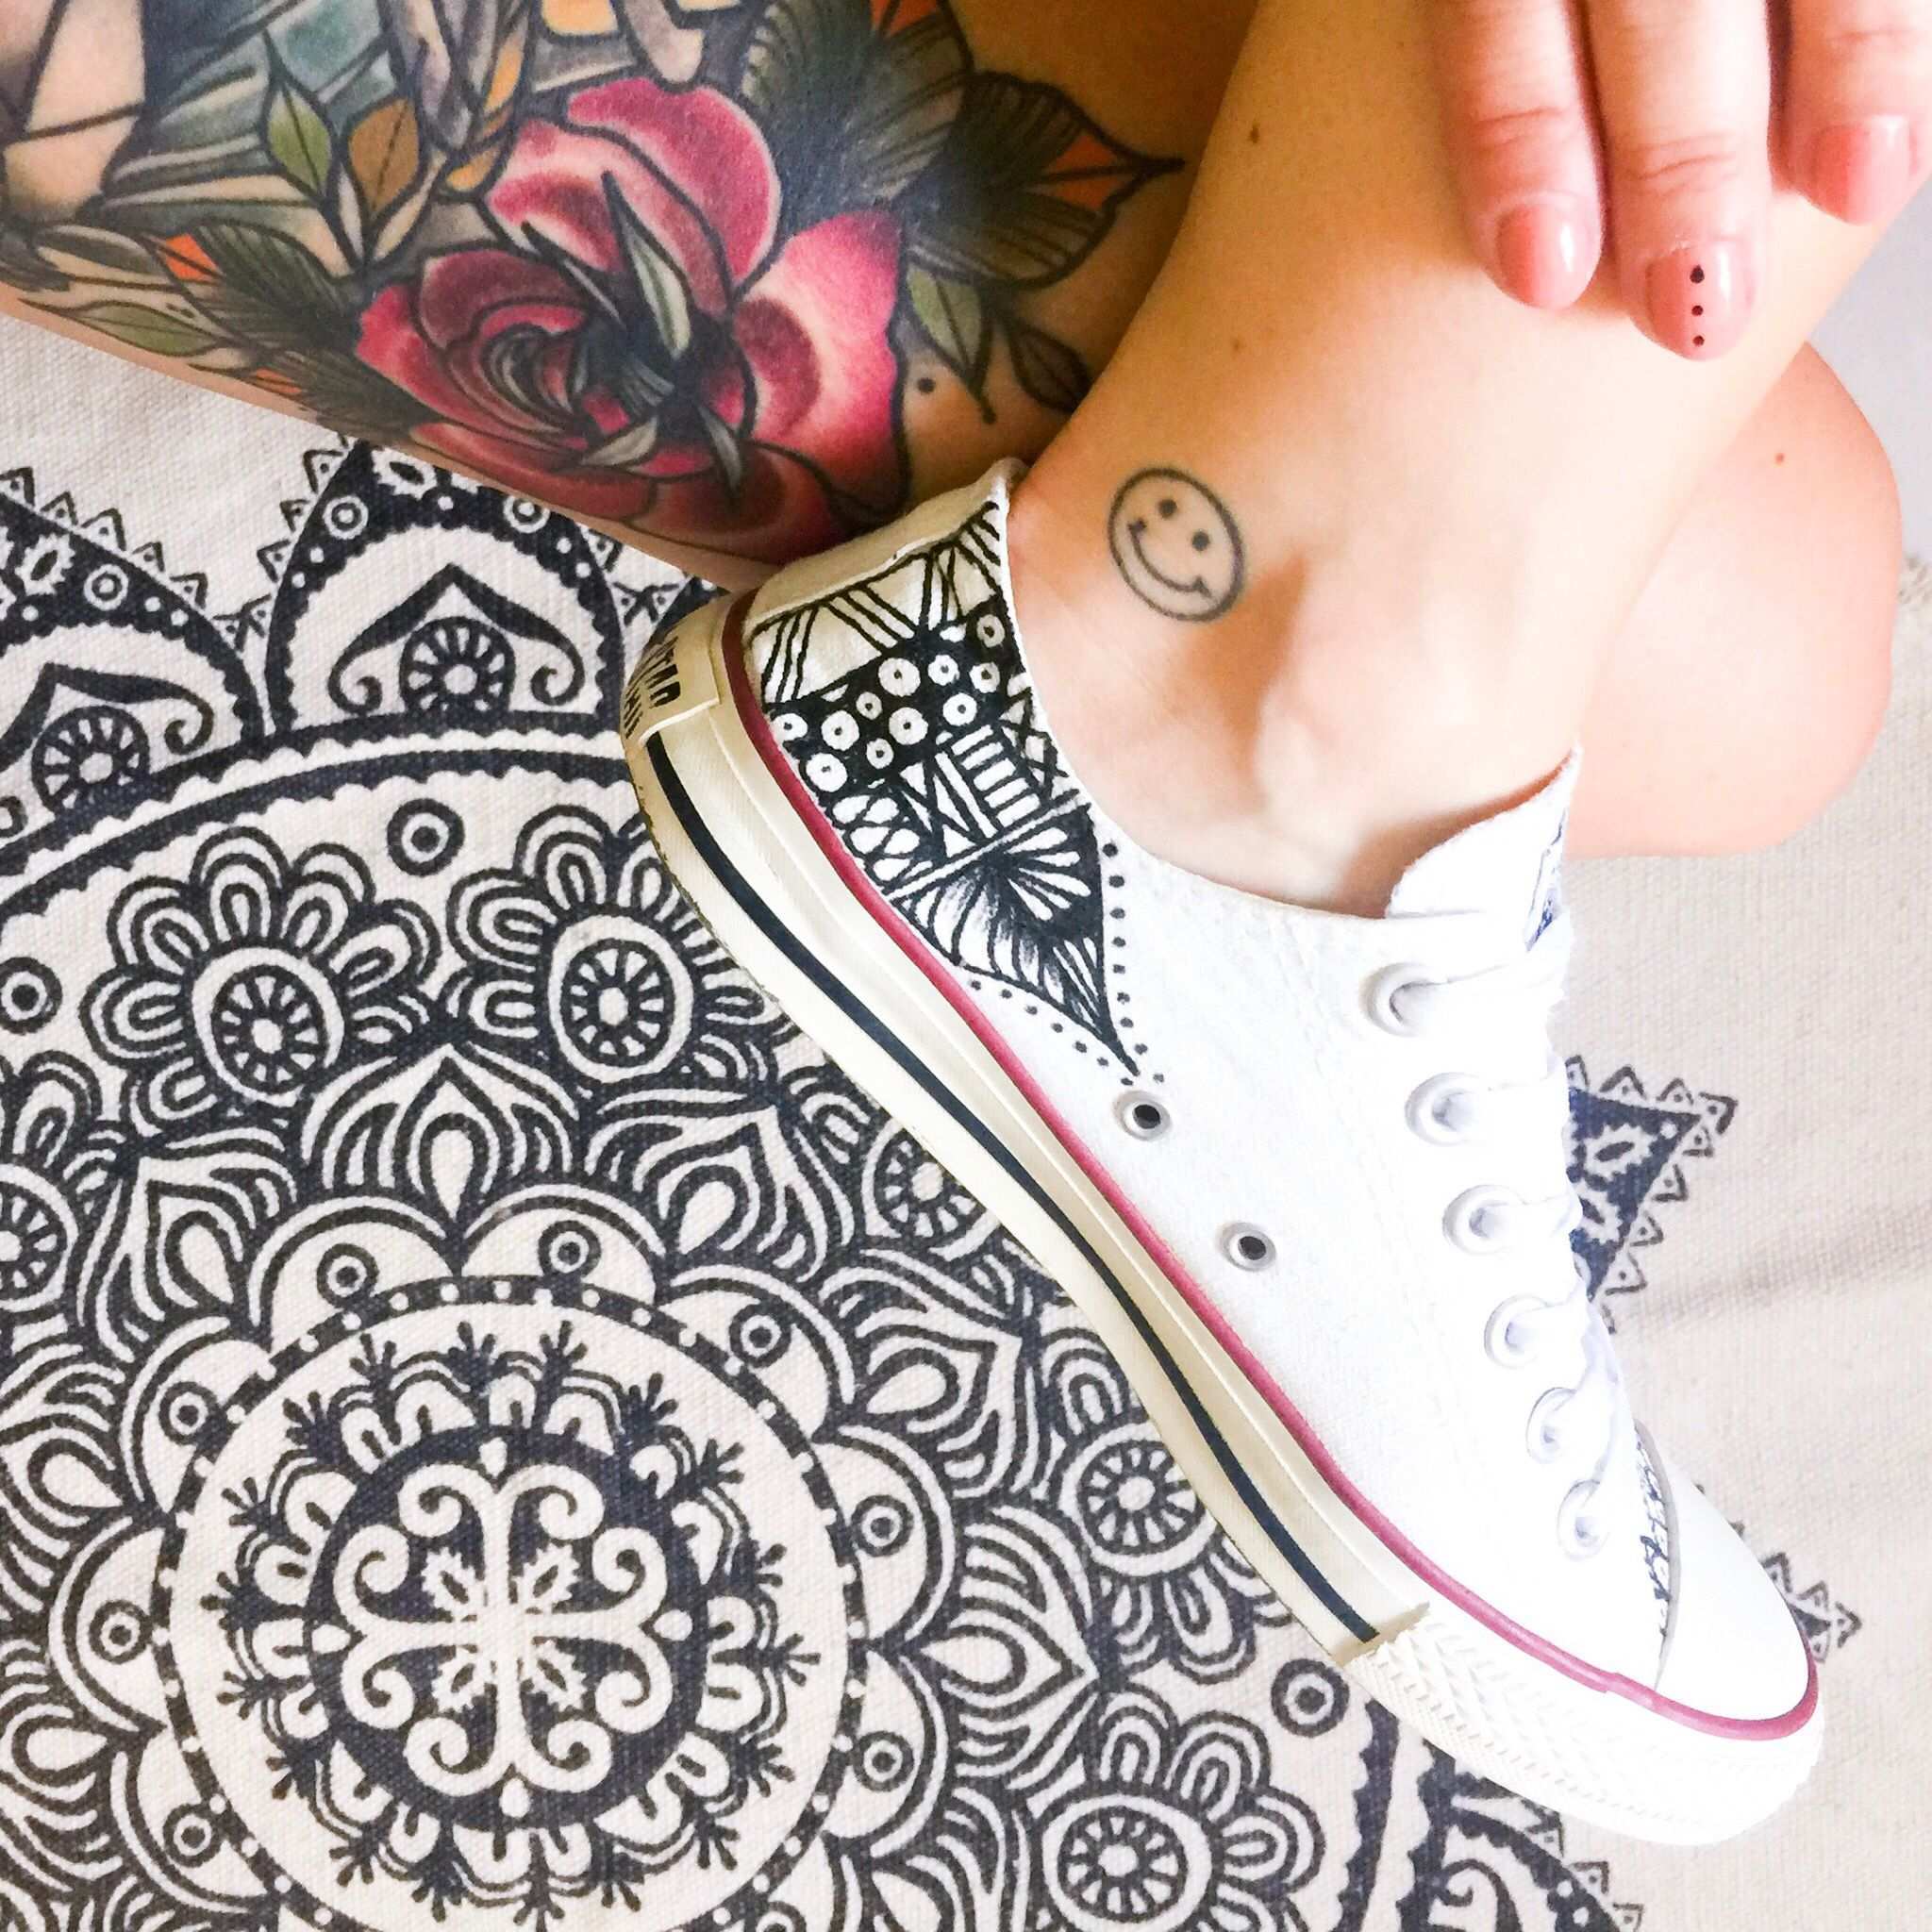 Chucks With Little Artwork Diy Shoes Painted Shoes Mom Shoes